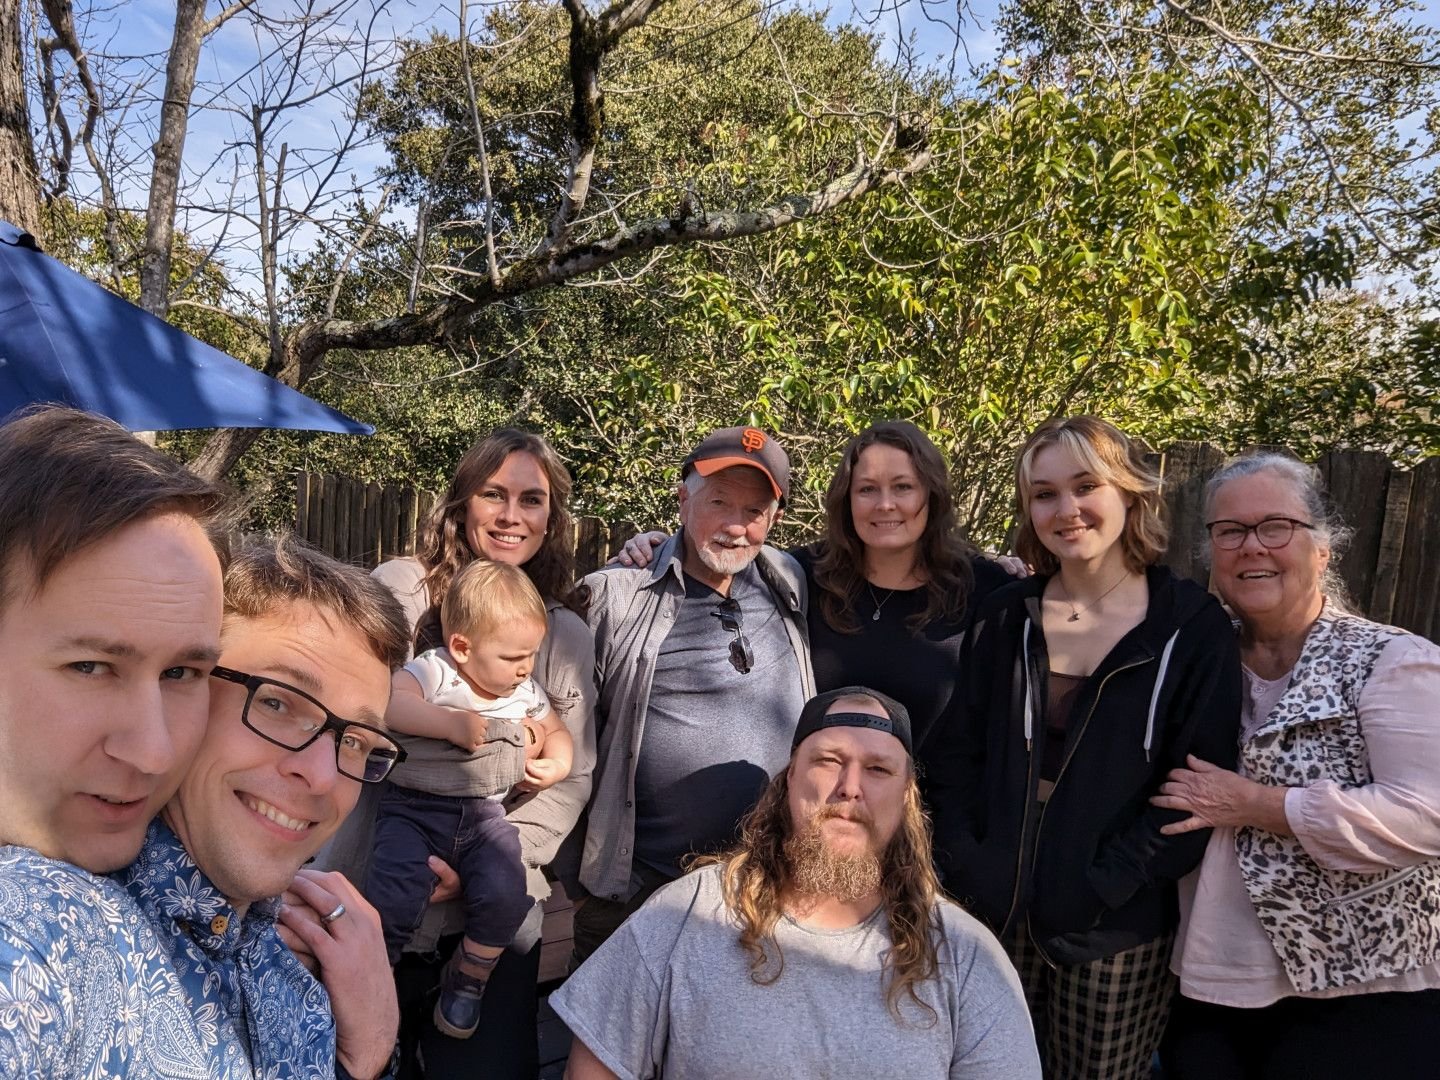 A family photo taken on a sunny winter day in our backyard. Lots of smiling faces against a backdrop of happy trees. From left to right: Chris, Josh, Jen holding Hunter, Carl, Greg in front, Abra, Shasta, and Donna.